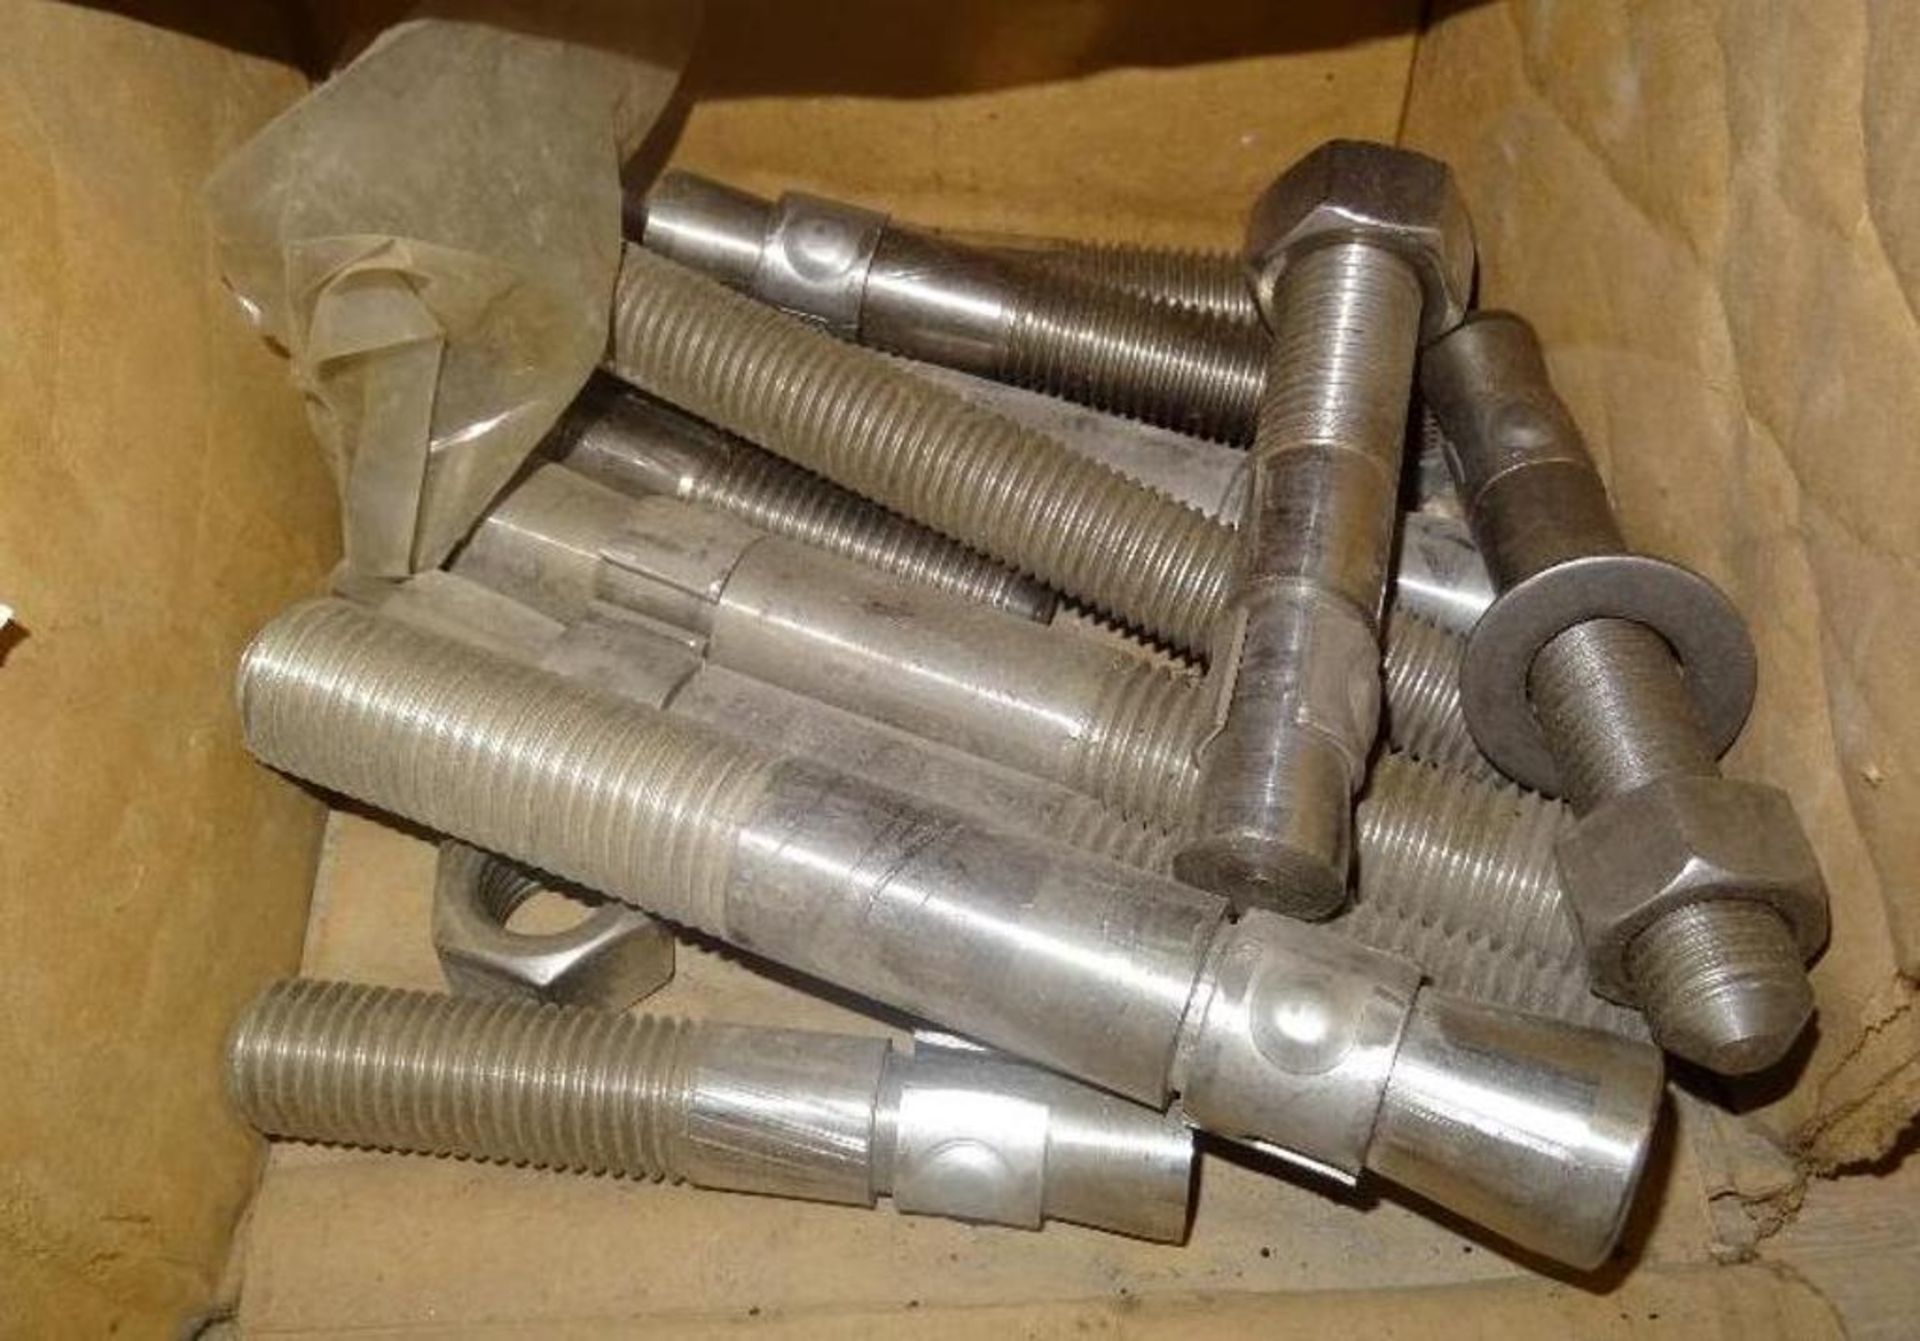 Assorted Anchor Bolts (1 to 1-1/4")